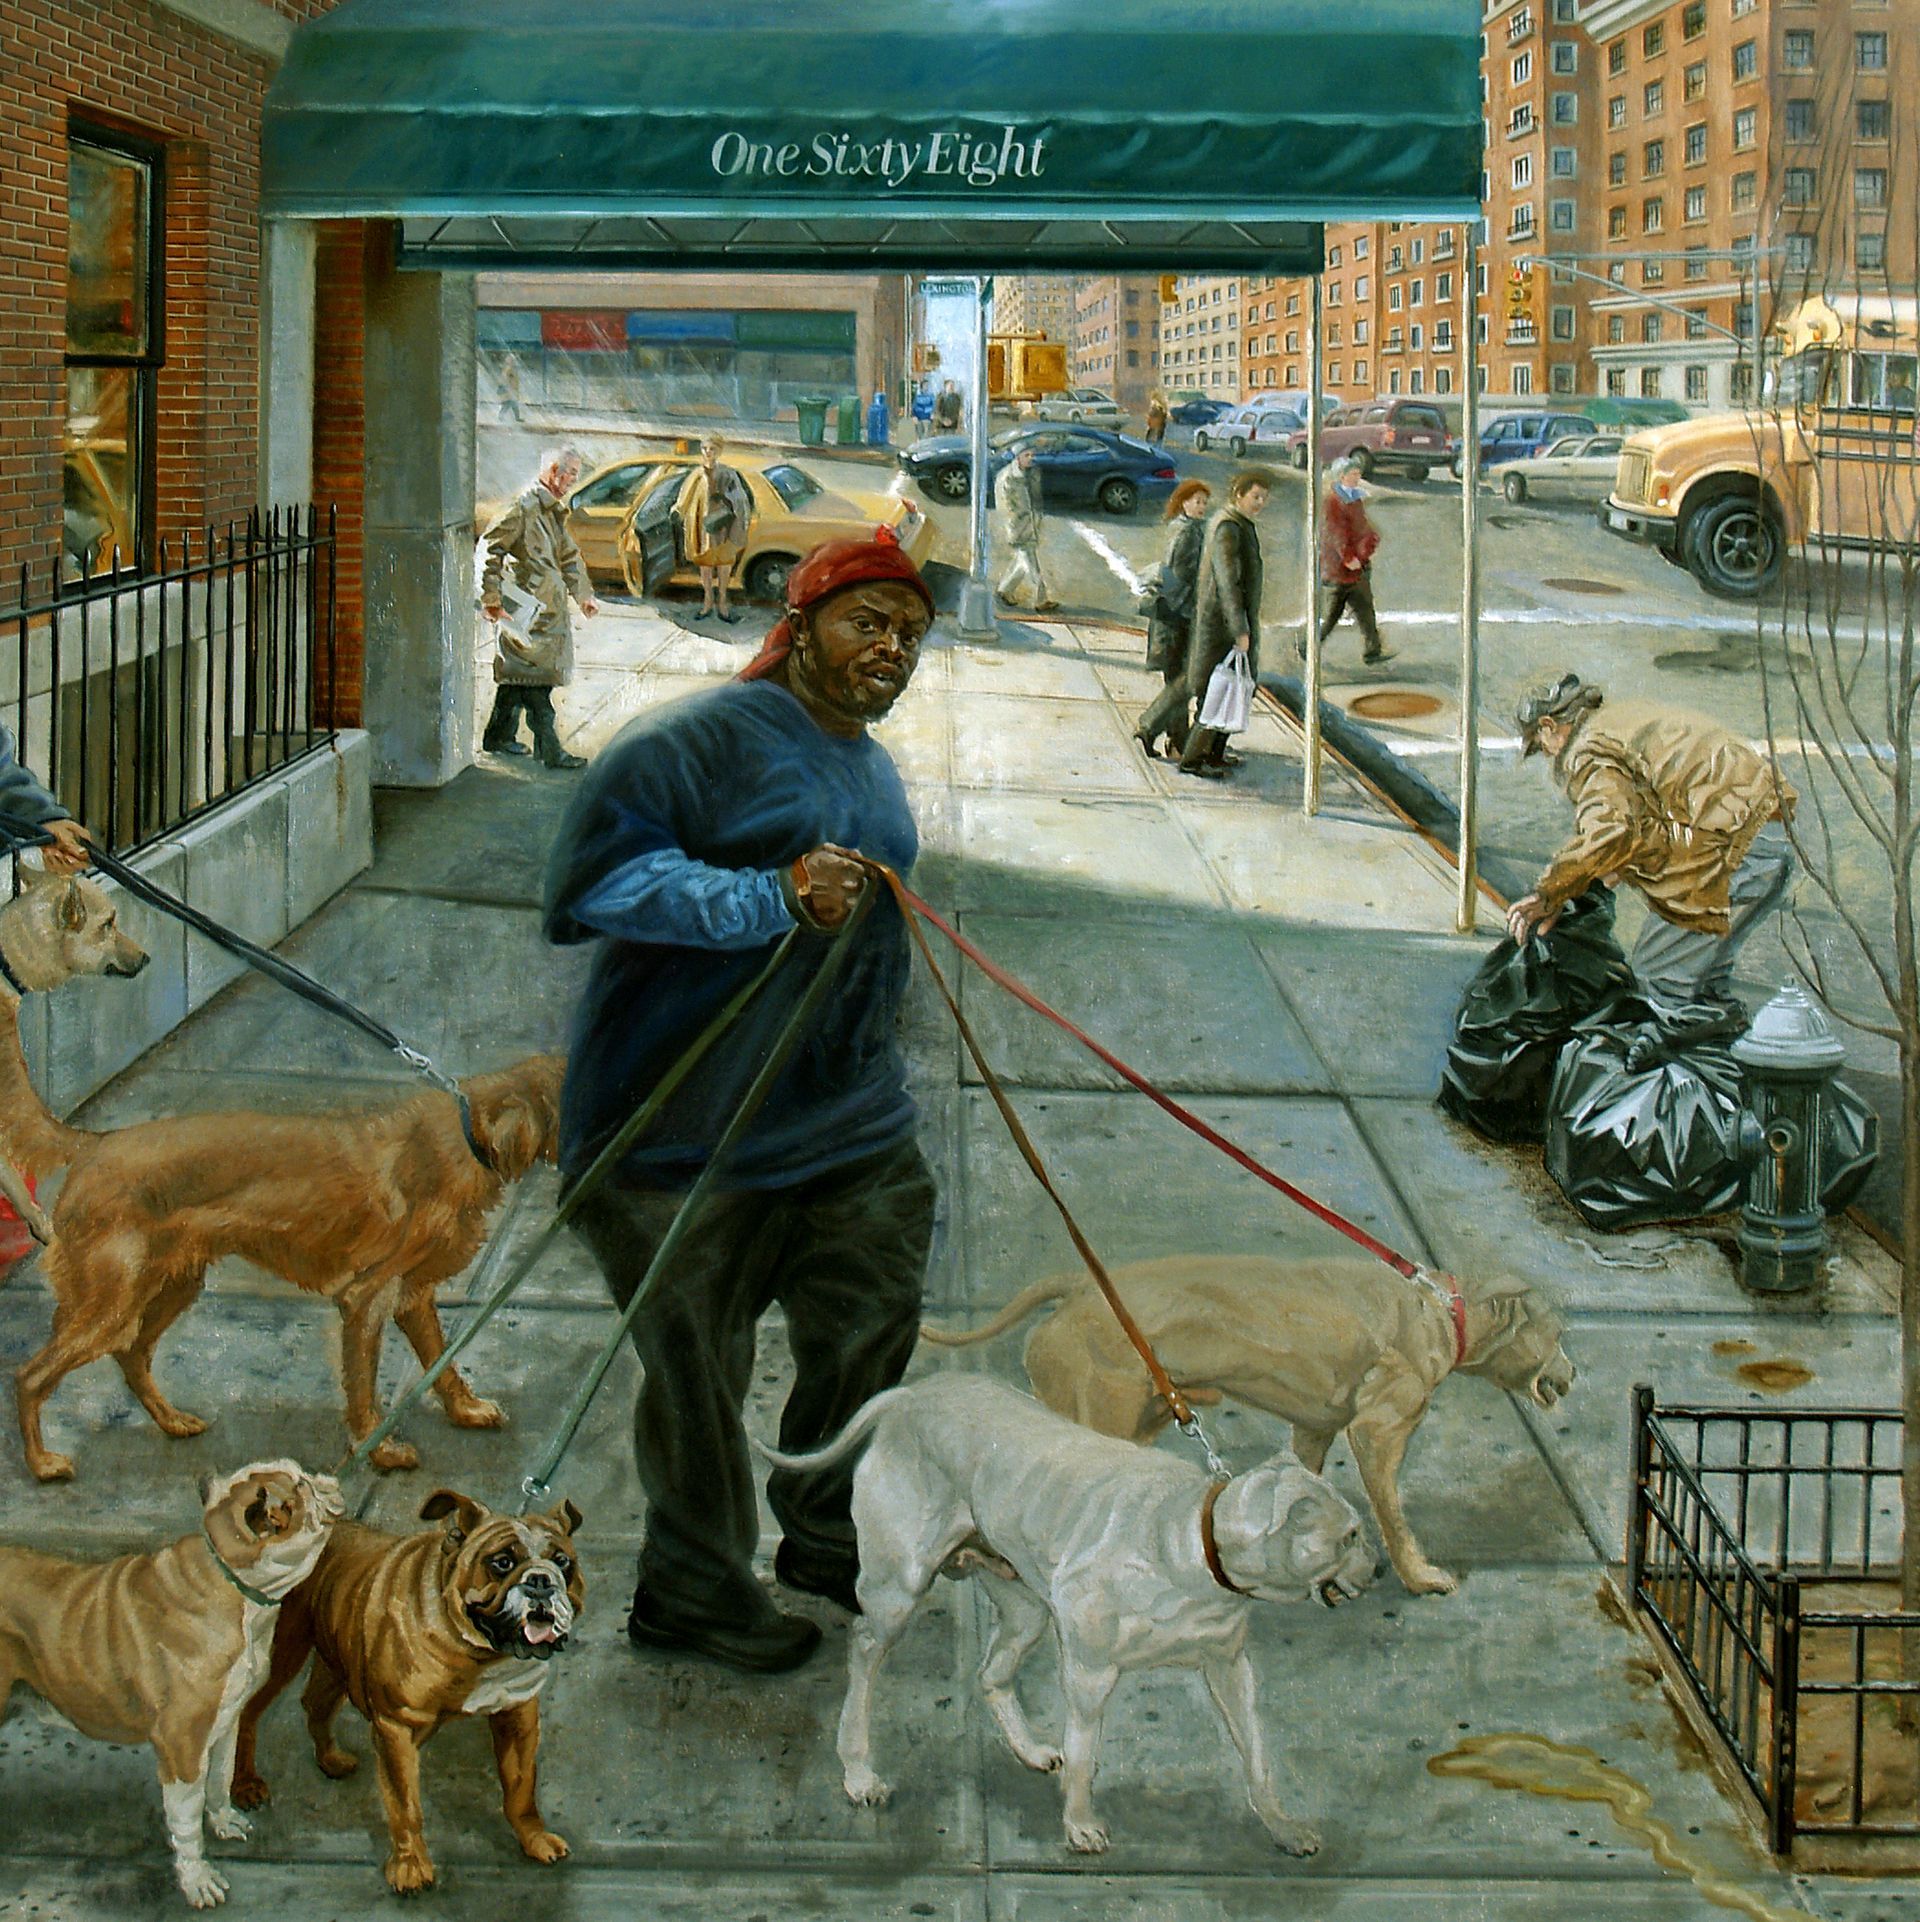 The Dog Walkers | Figurative Oil Painting by John Varriano